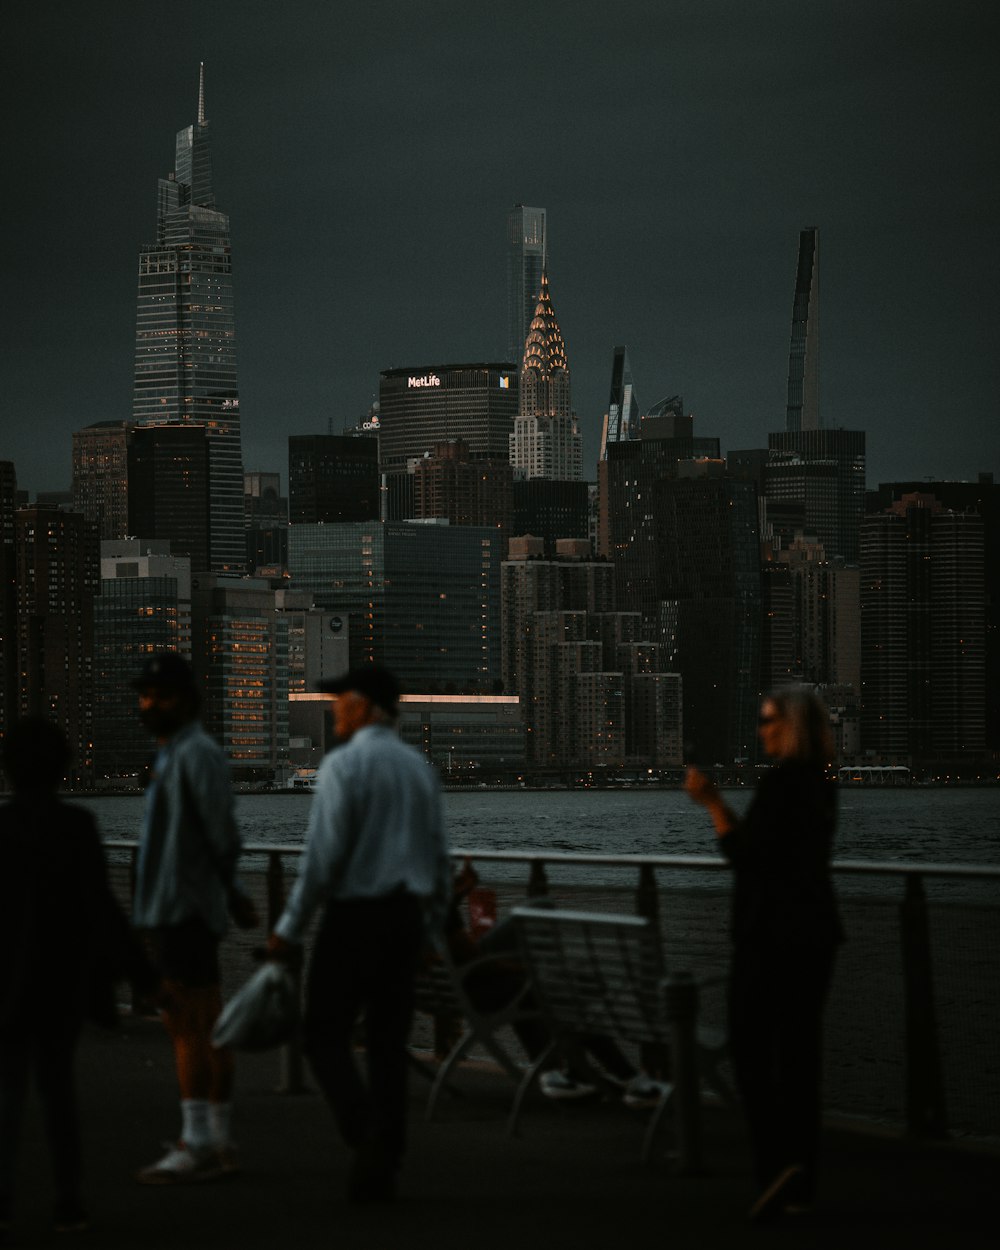 a group of people standing on a dock with a city skyline in the background